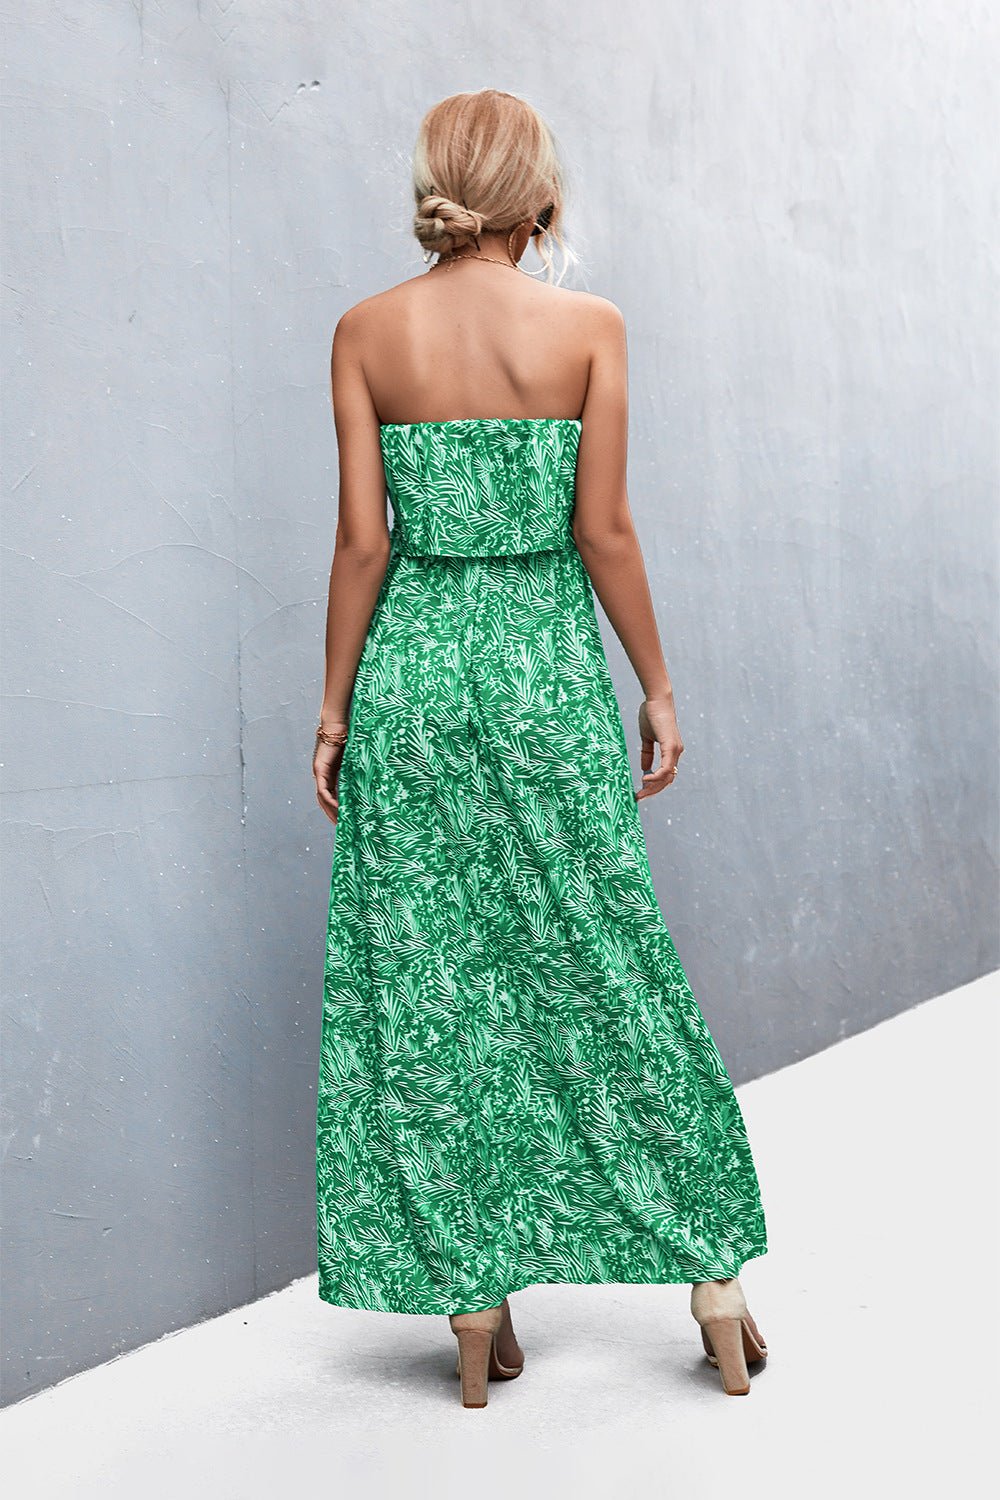 Strapless Maxi Dress Casual - green floral strapless maxi dress with split leg. A summer day outfit. #Firefly Lane Boutique1